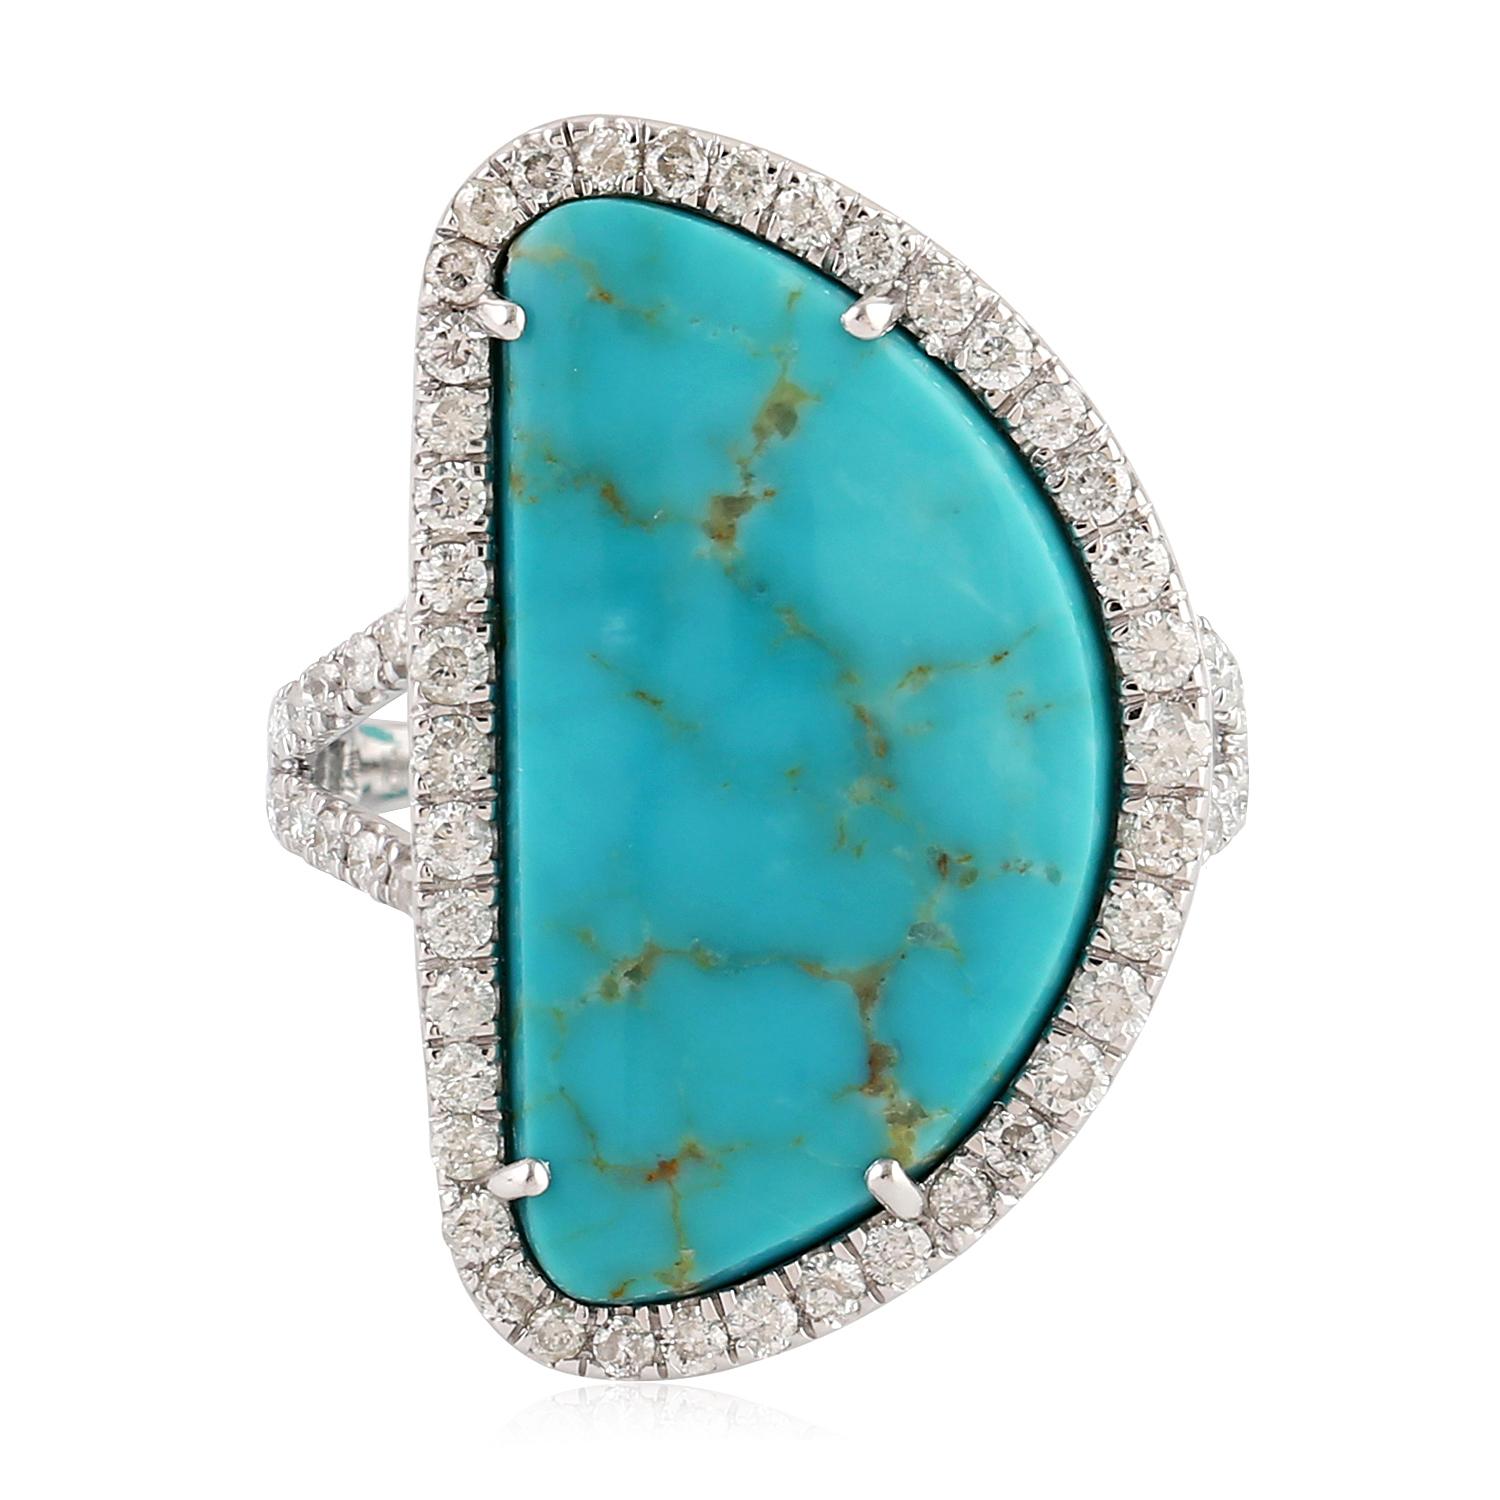 7.60ct Natural Turquoise Cocktail Ring With Diamonds Made In 18k White Gold In New Condition For Sale In New York, NY